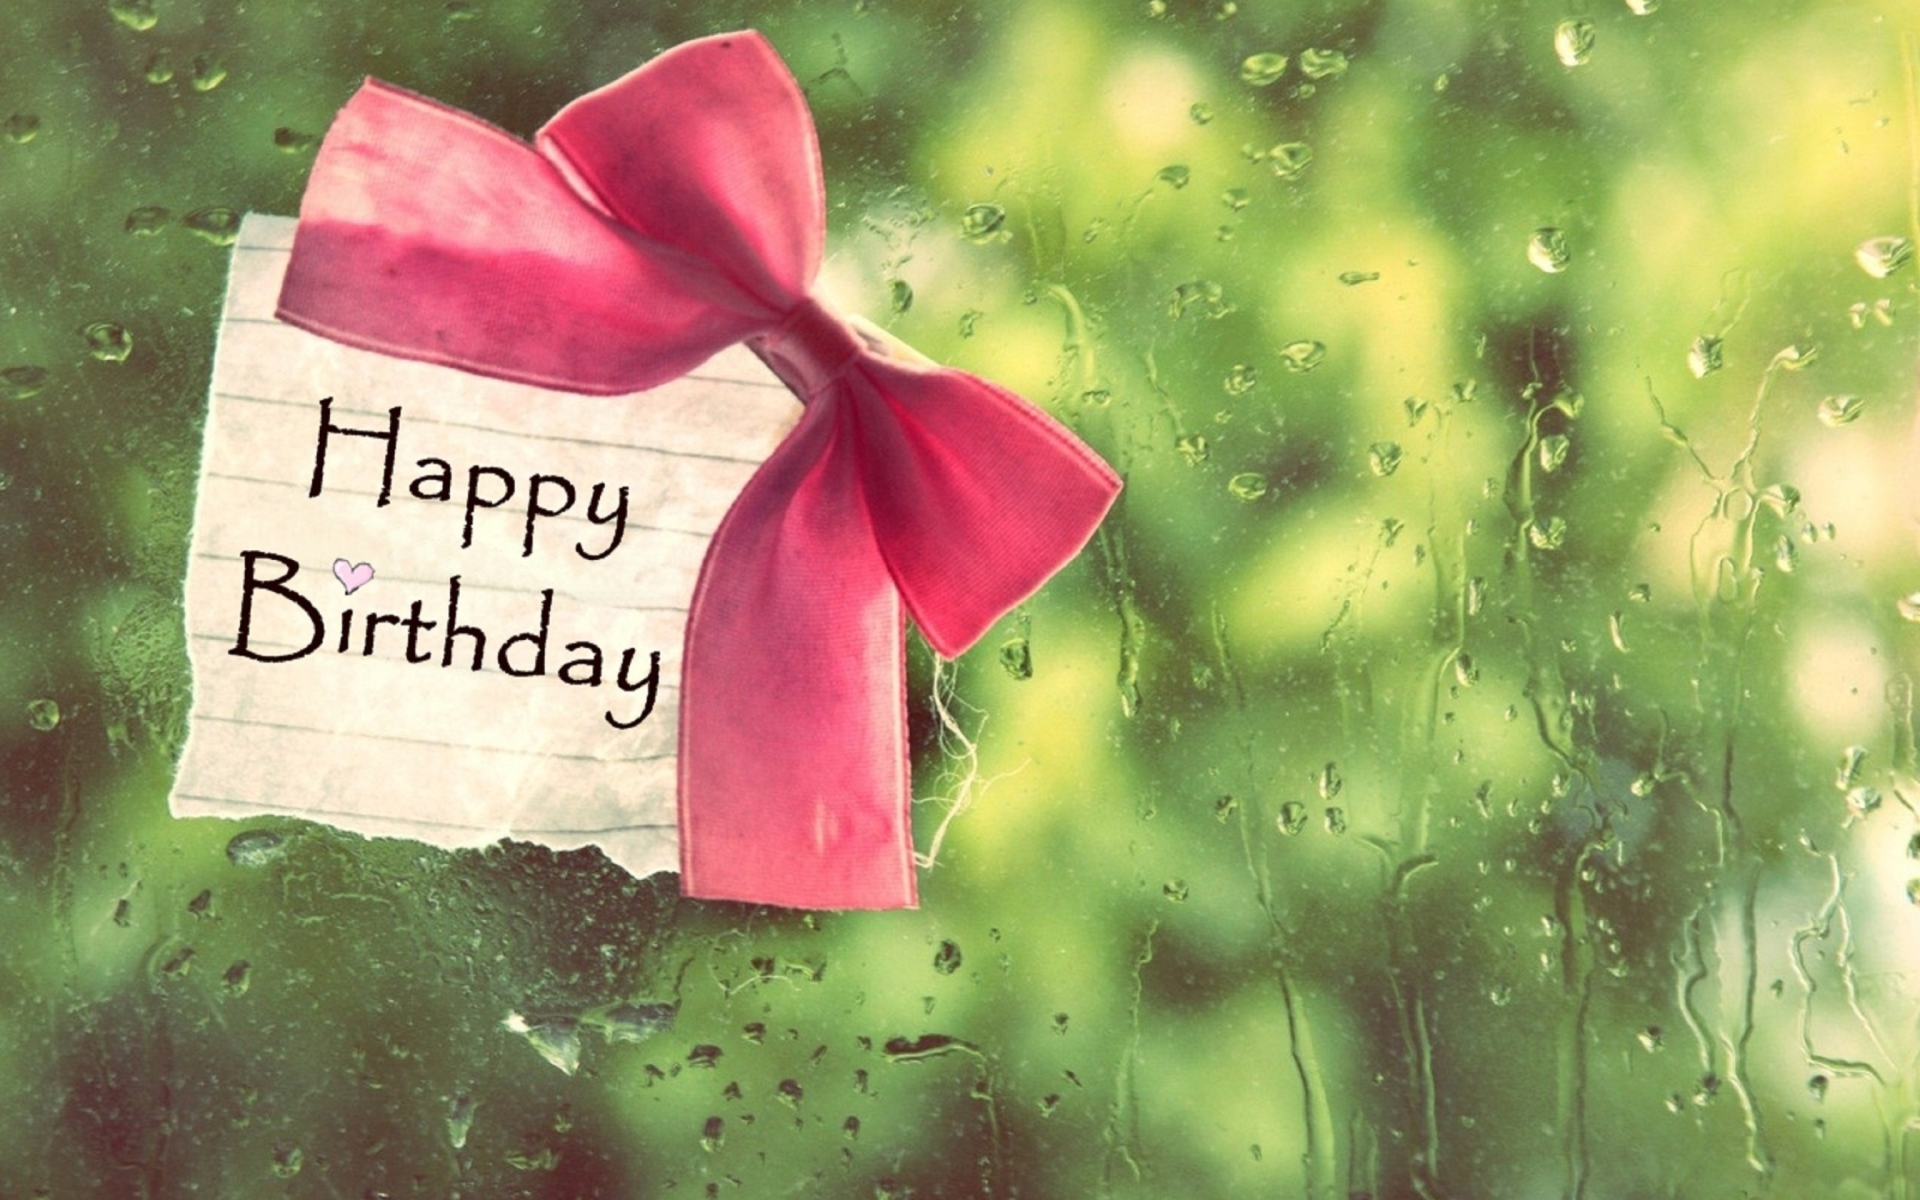 Happy Birthday Background Images Hd - HD Wallpaper 